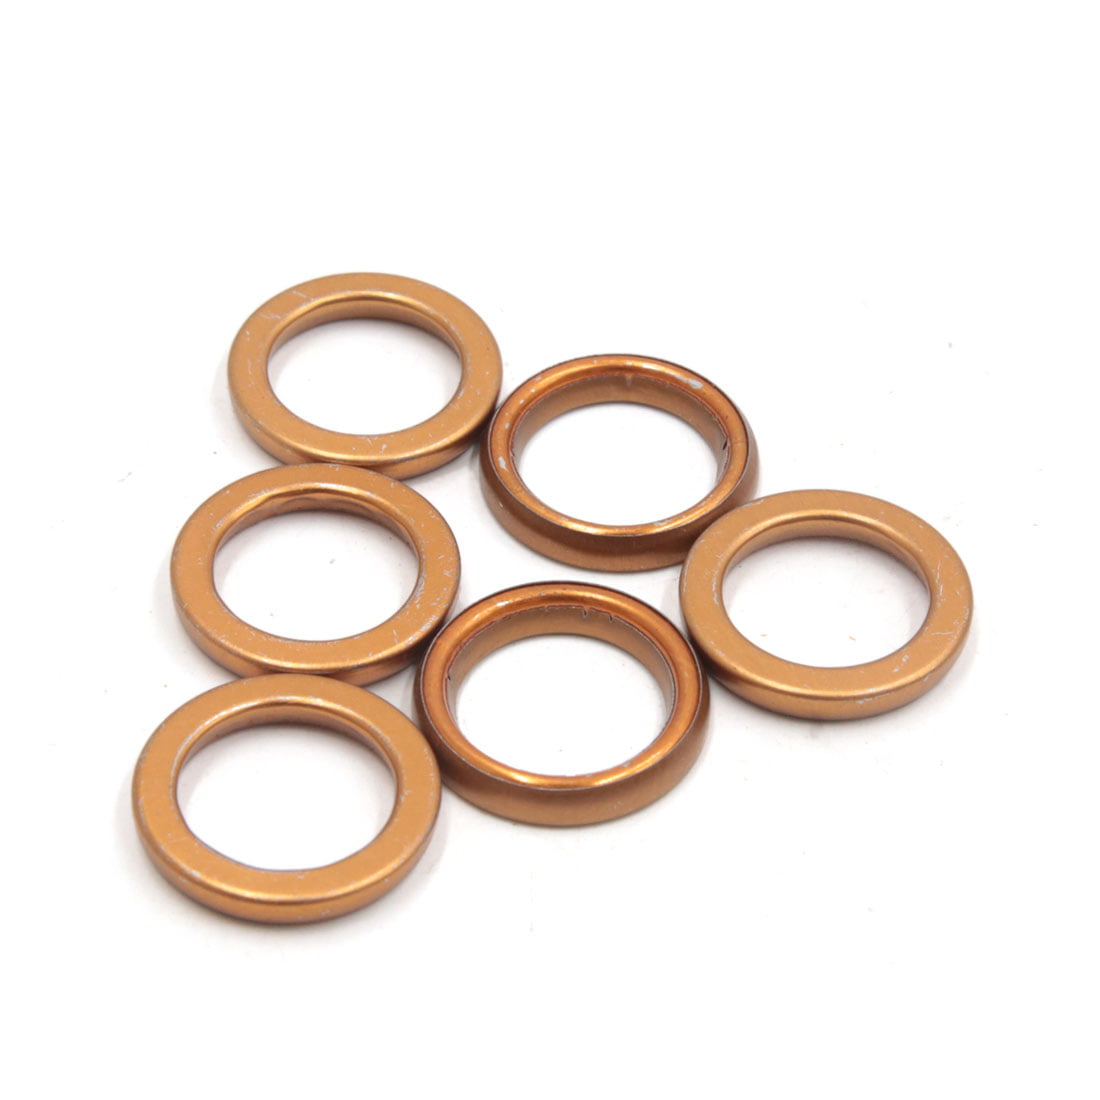 F FIERCE CYCLE 2pcs 25mm ID 33mm OD Motorcycle Exhaust Muffler Pipe Gasket Copper Tone for Jiangling JH70 100 110 125 150CC 